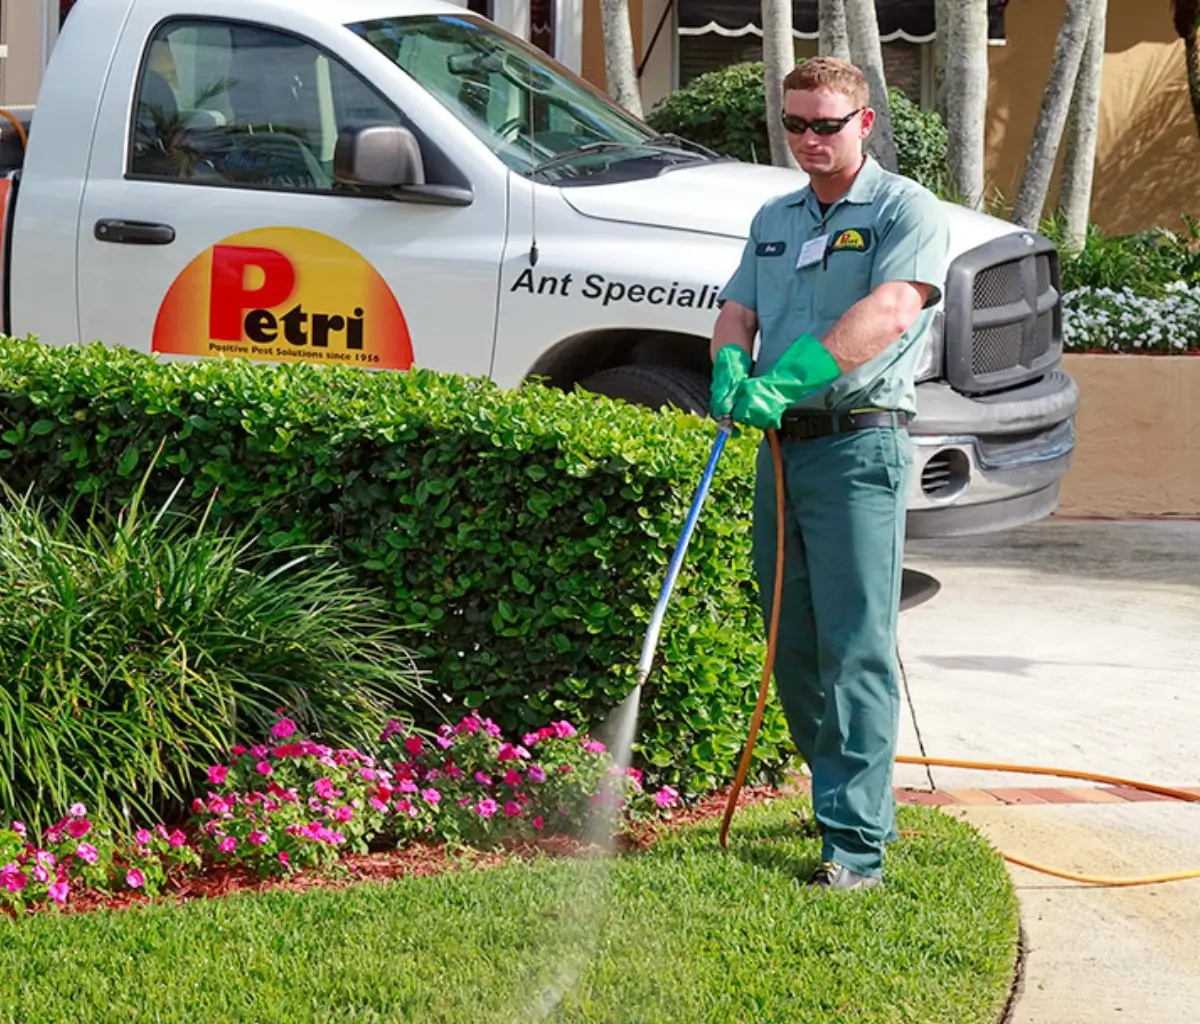 Lawn spraying and treatment services by Petri Pest Control in South Florida